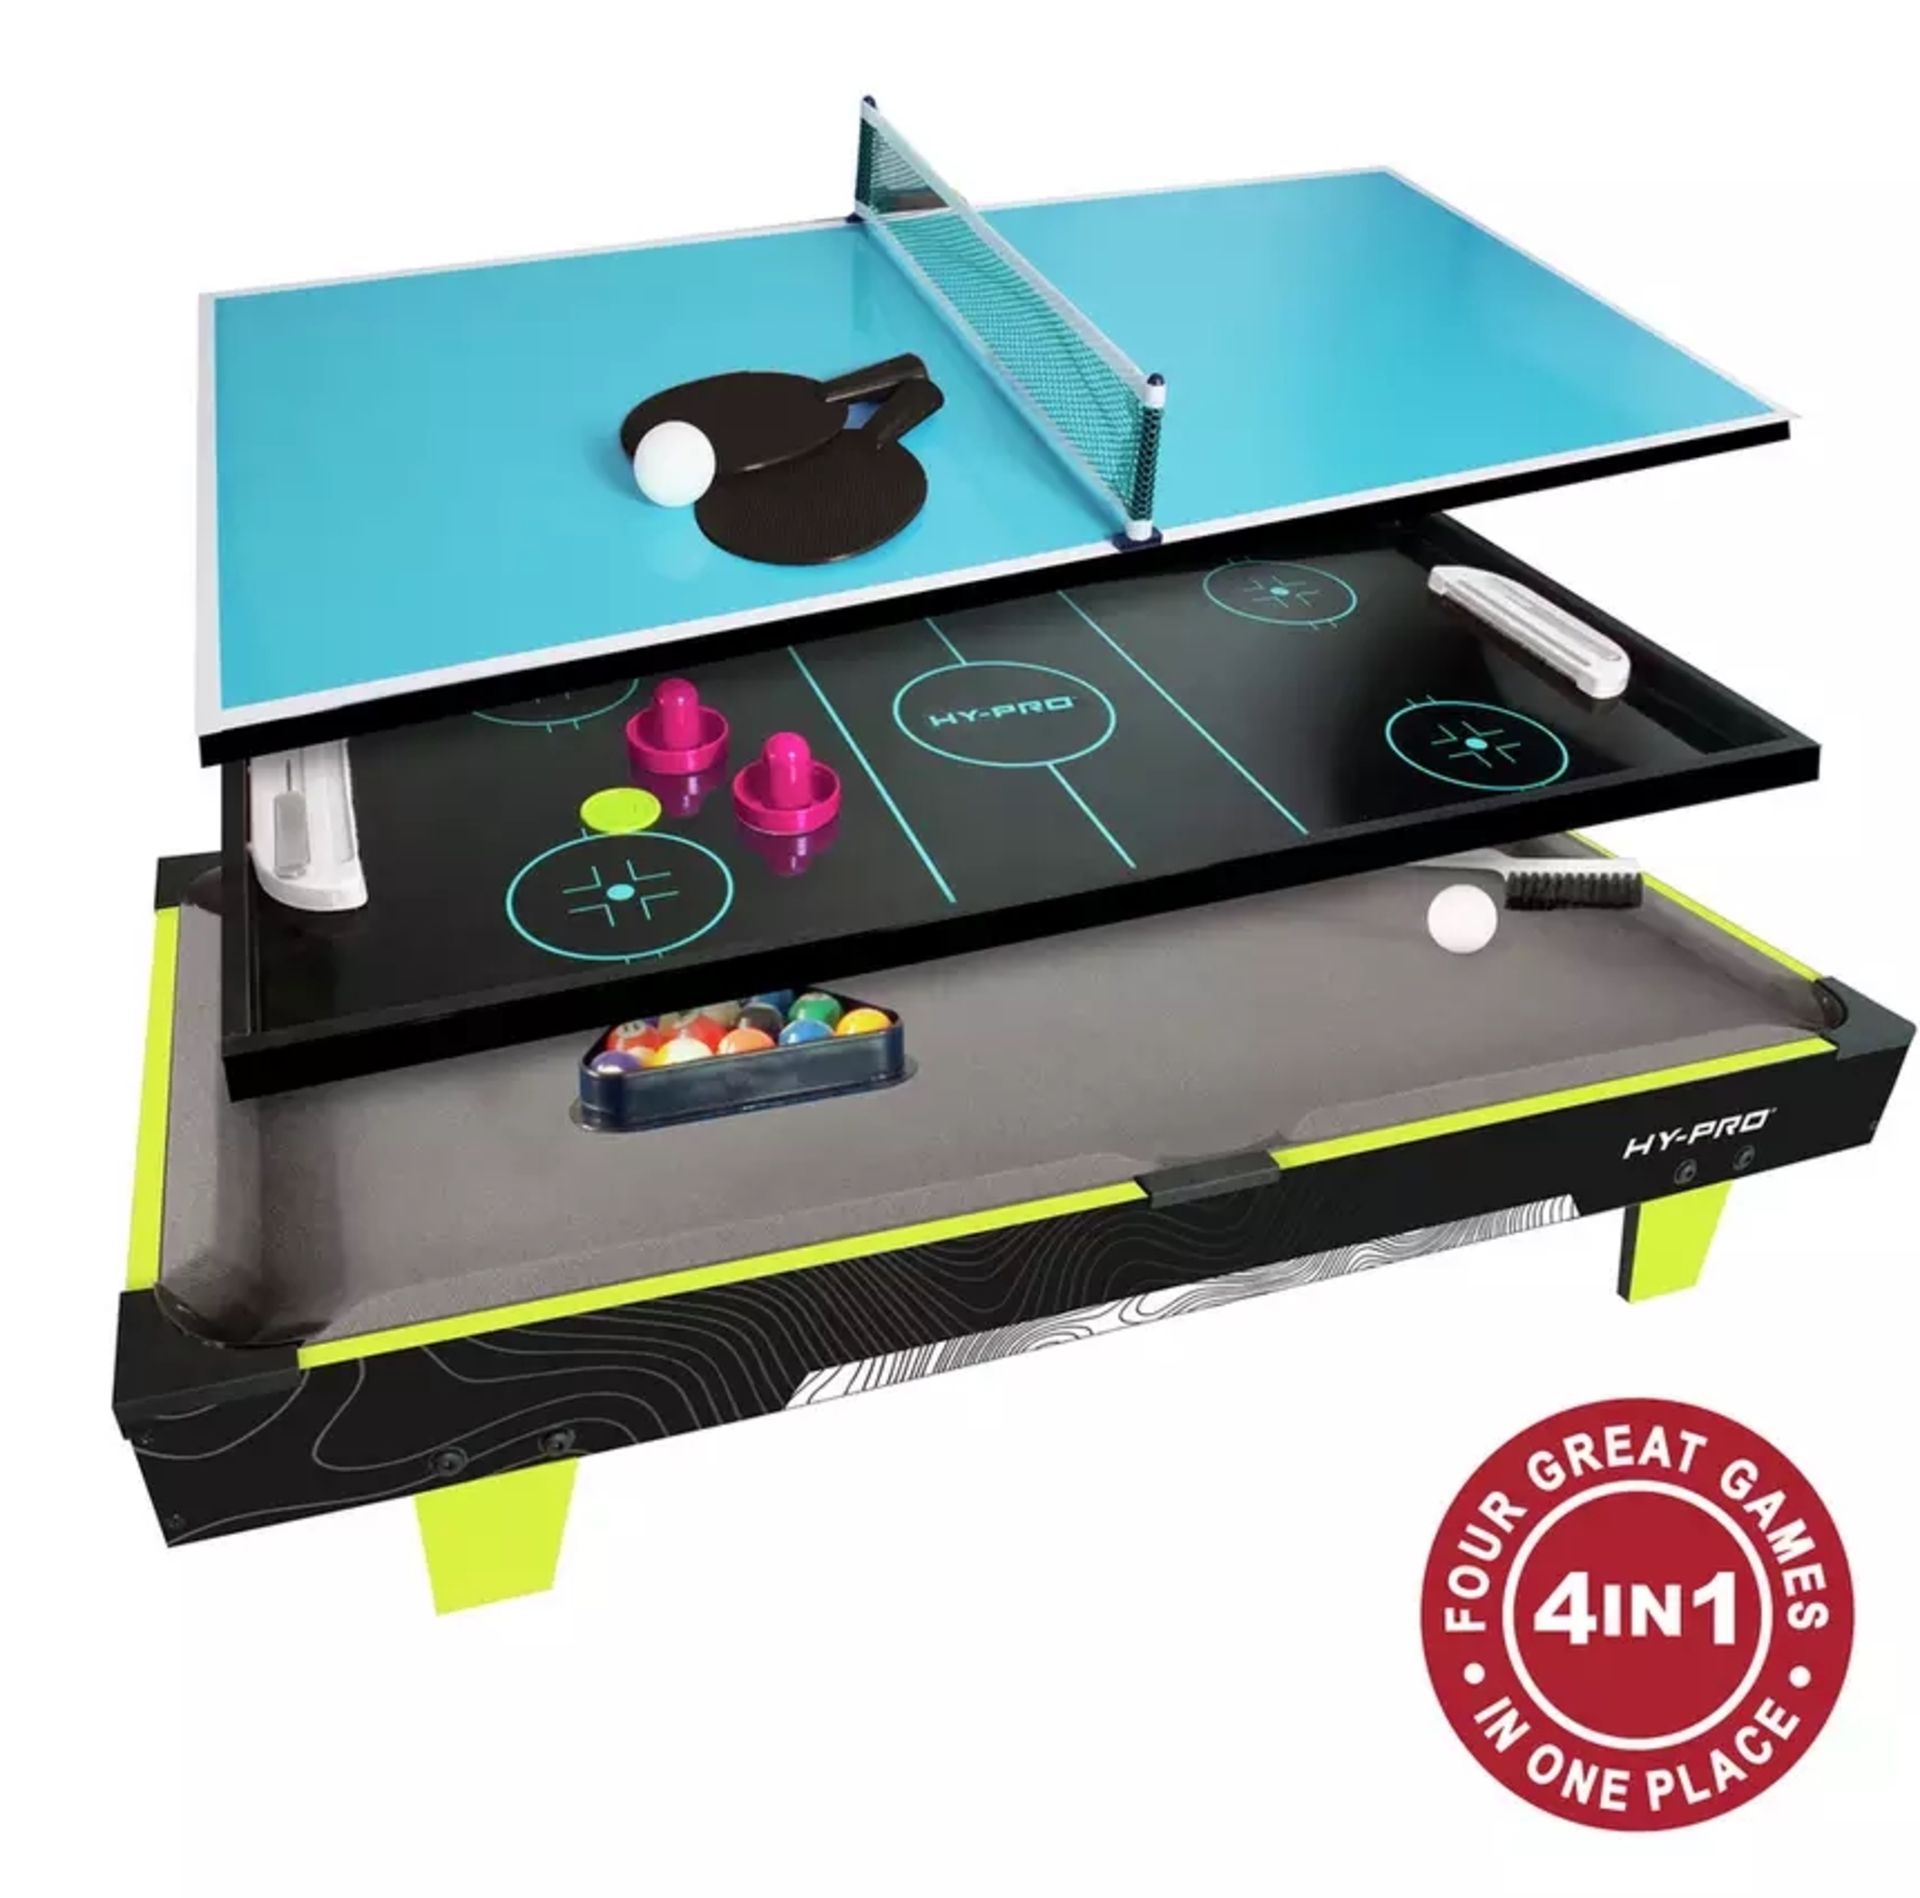 Title: (12/7A) 2x HyPro Items. 1x 3 In 1 Table Top Multi Game Set. 1x BasketBall Electronic